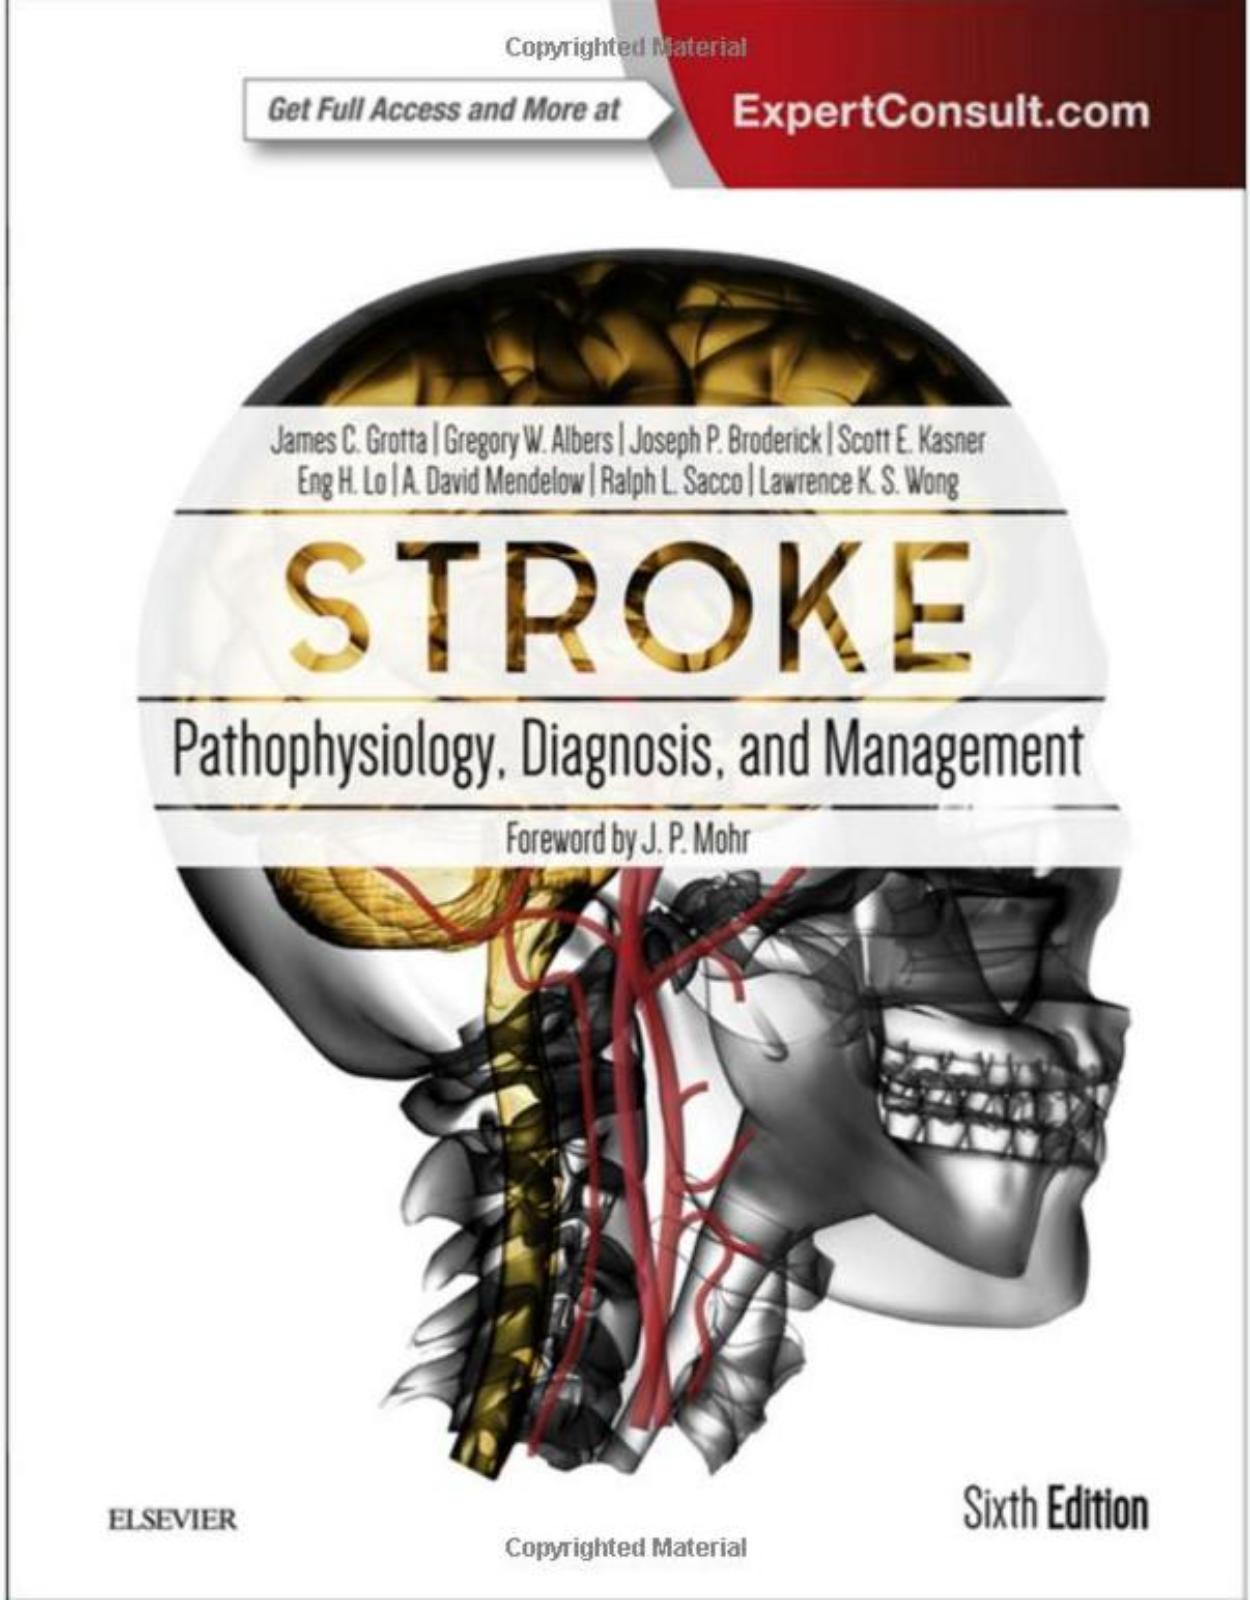 Stroke, 6th Edition  Pathophysiology, Diagnosis, and Management 